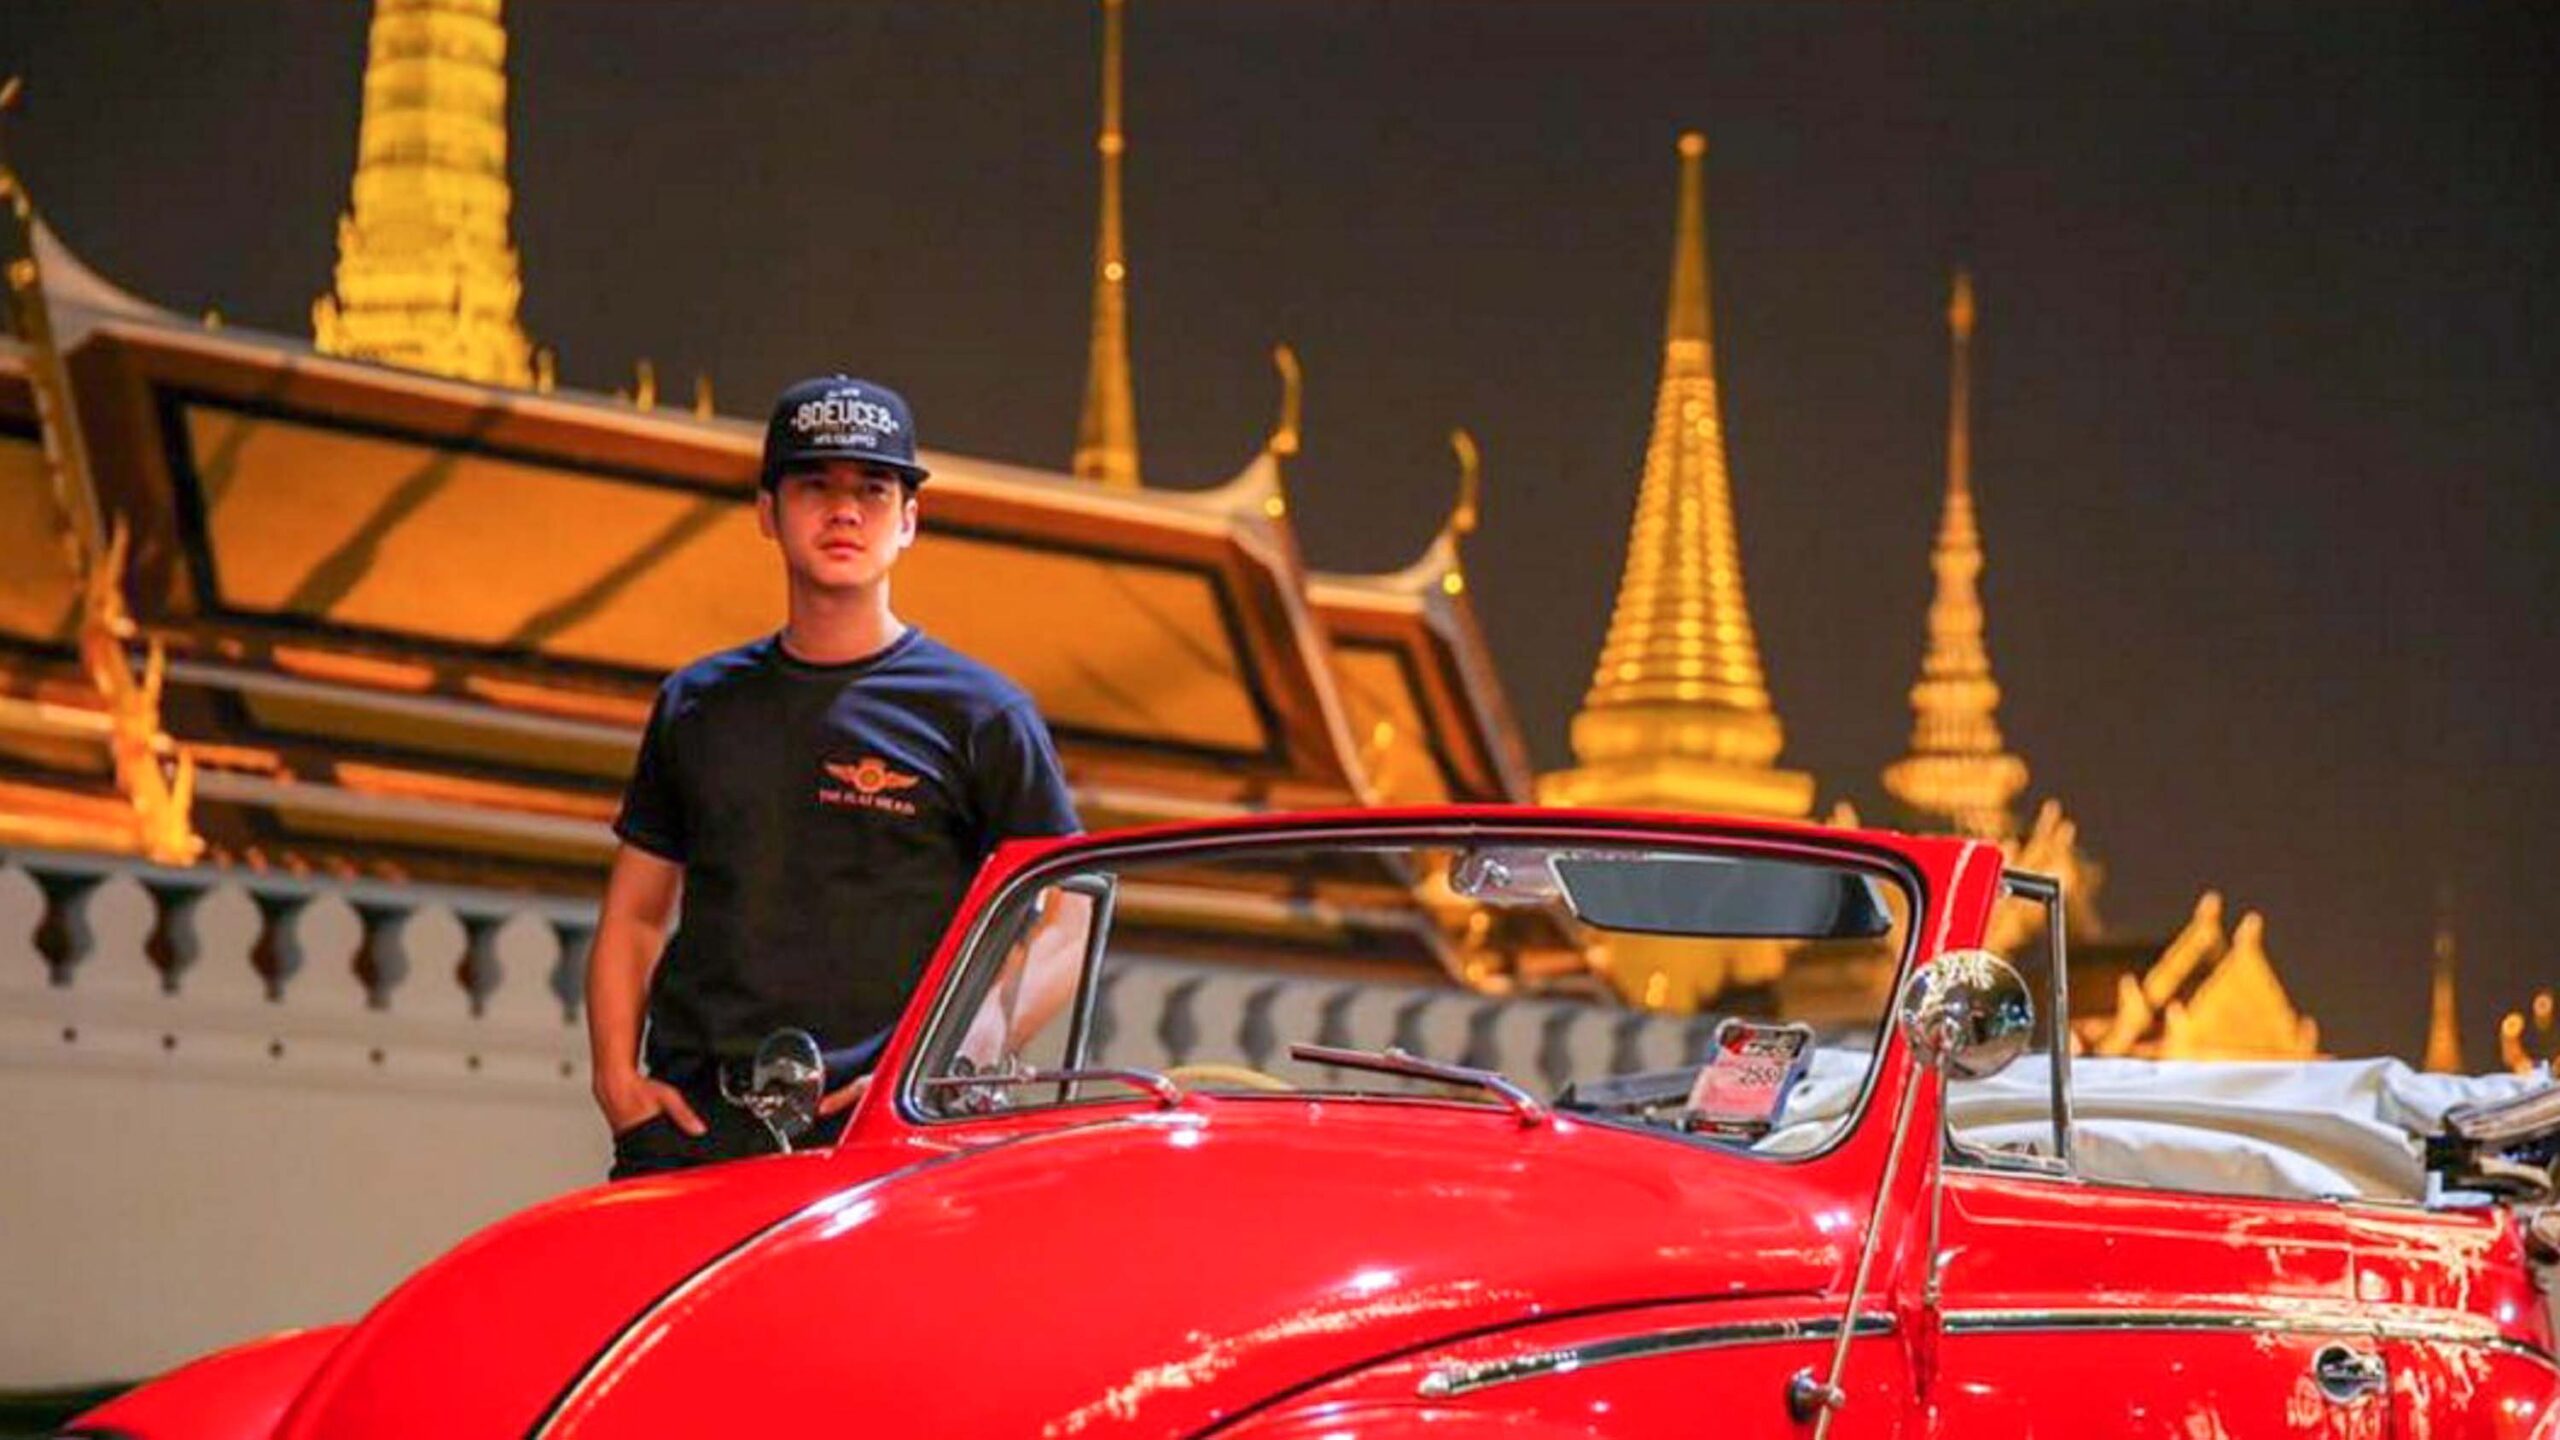 Mario Maurer shares 10 fun things to do in Thailand